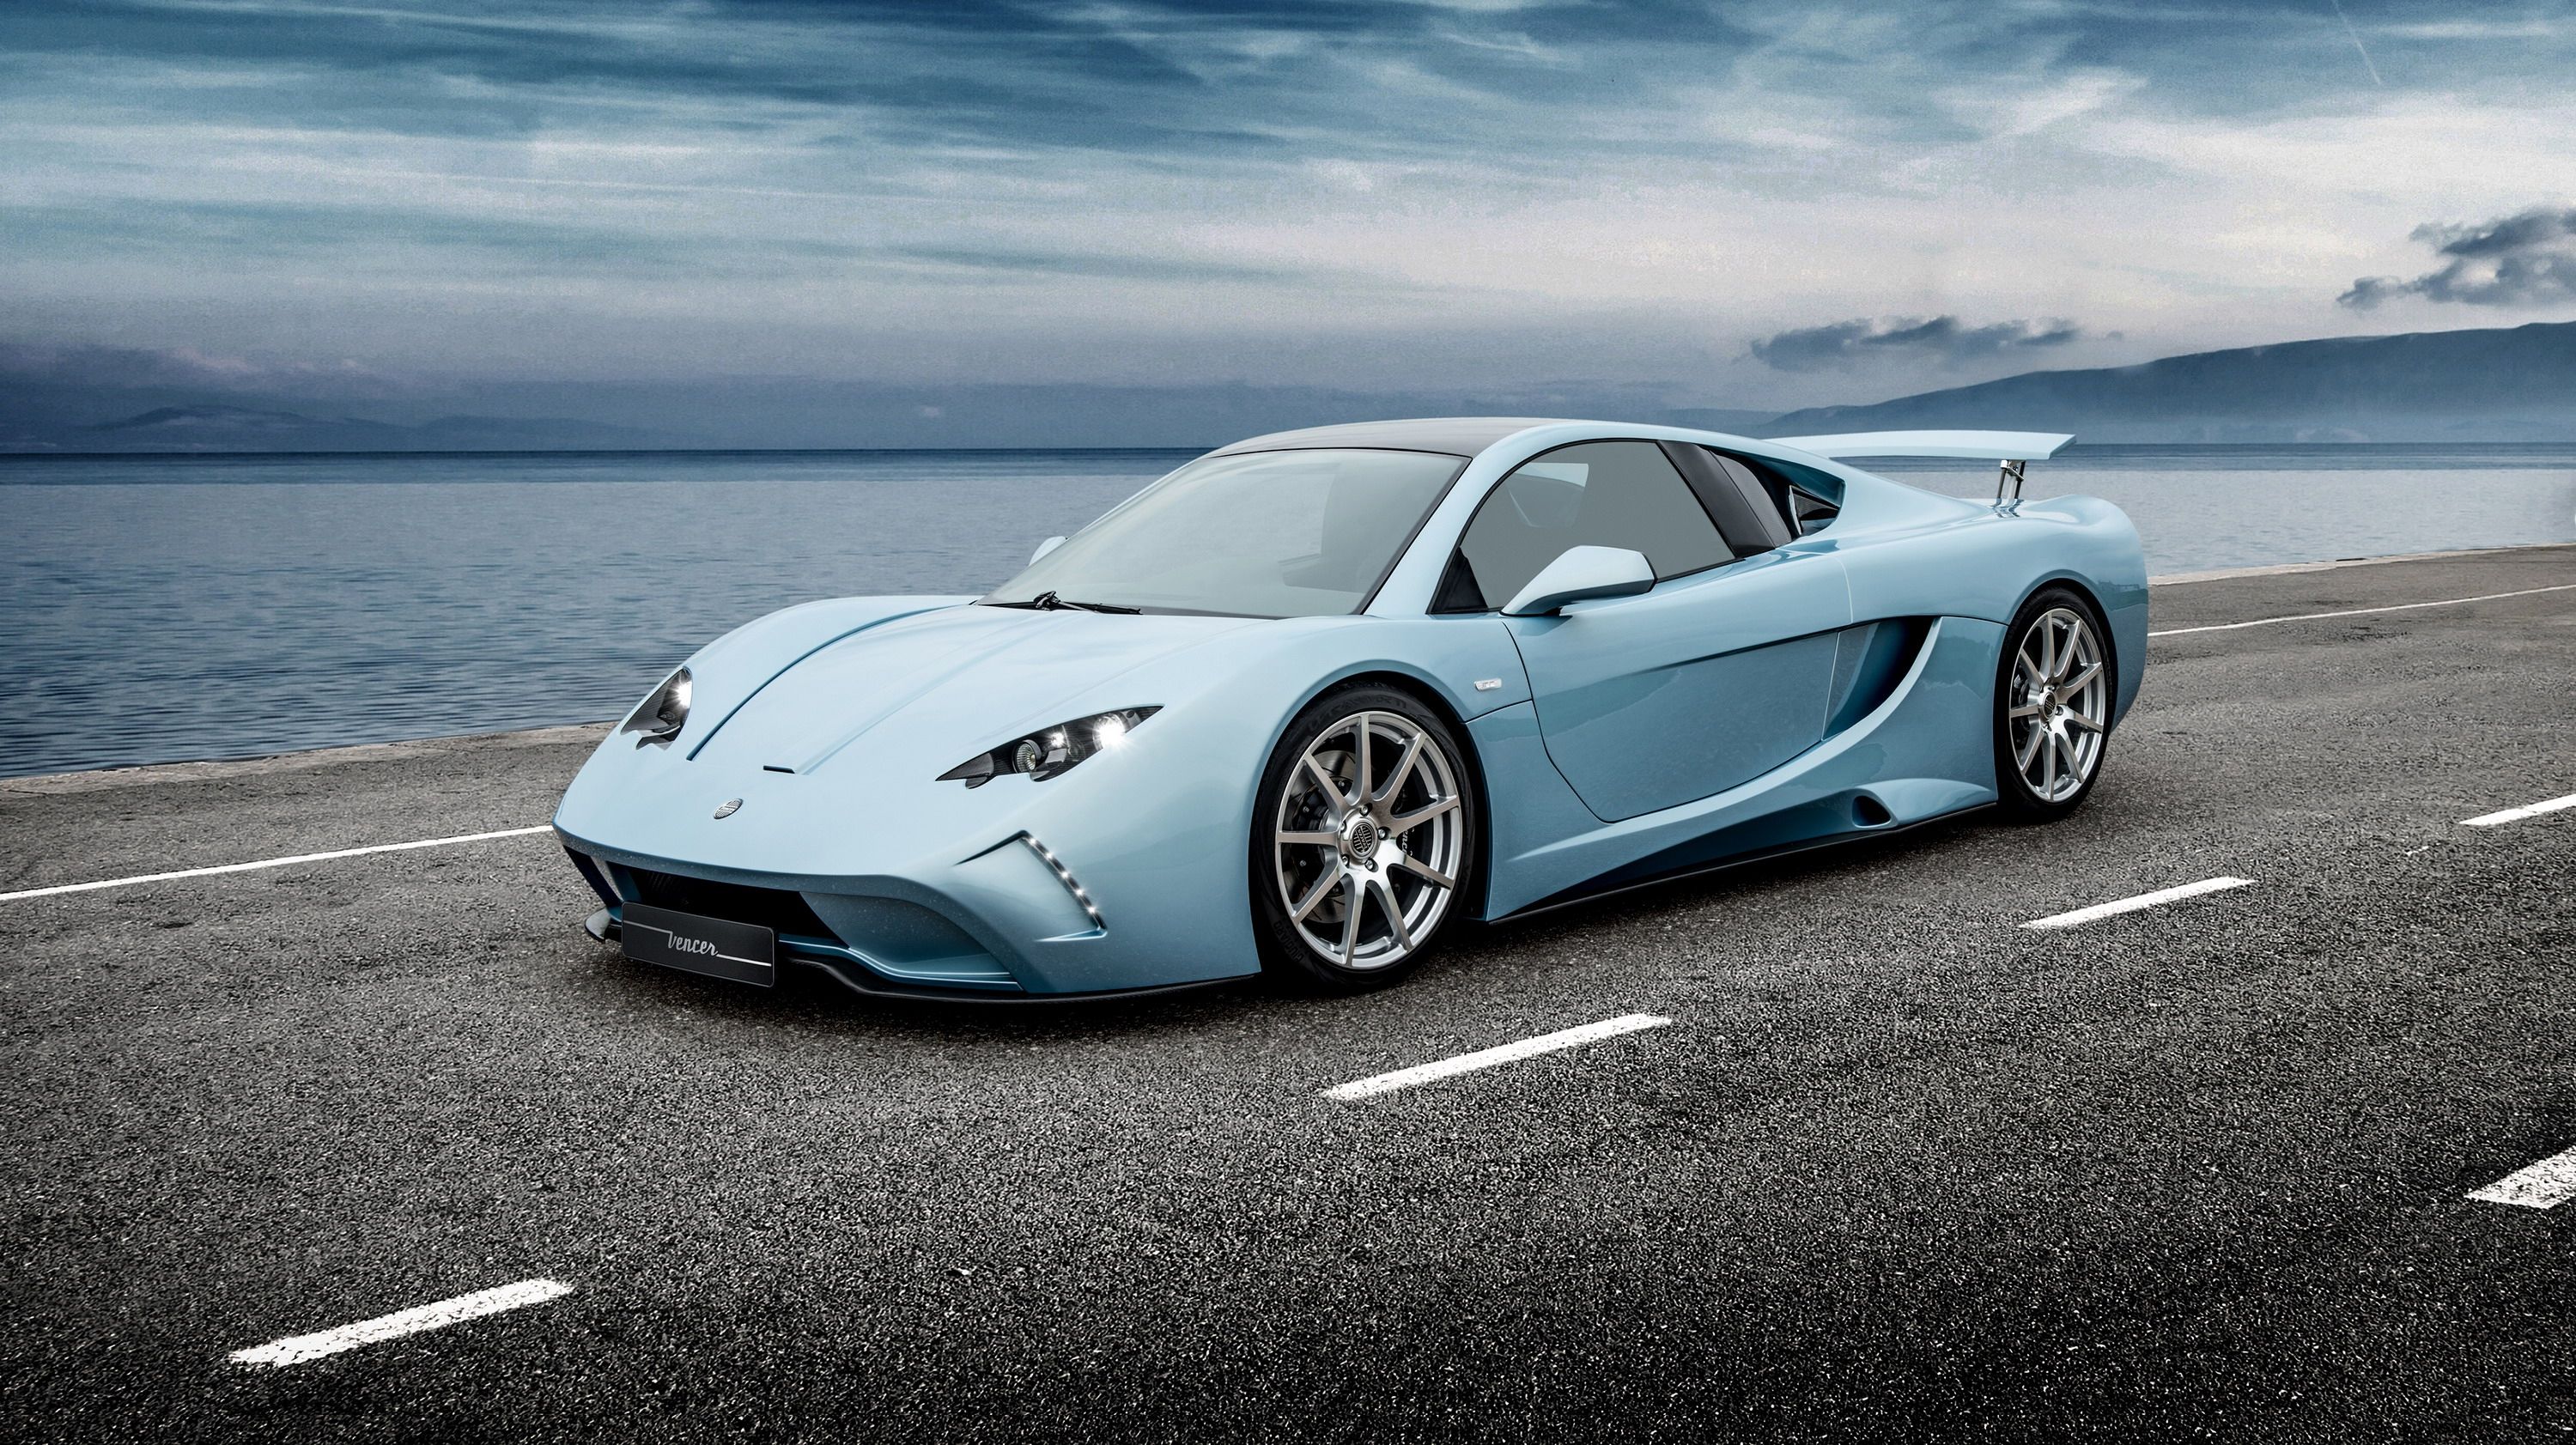  The Vencer Sarthe is what a supercar needs to be; all the power and no nannies. 